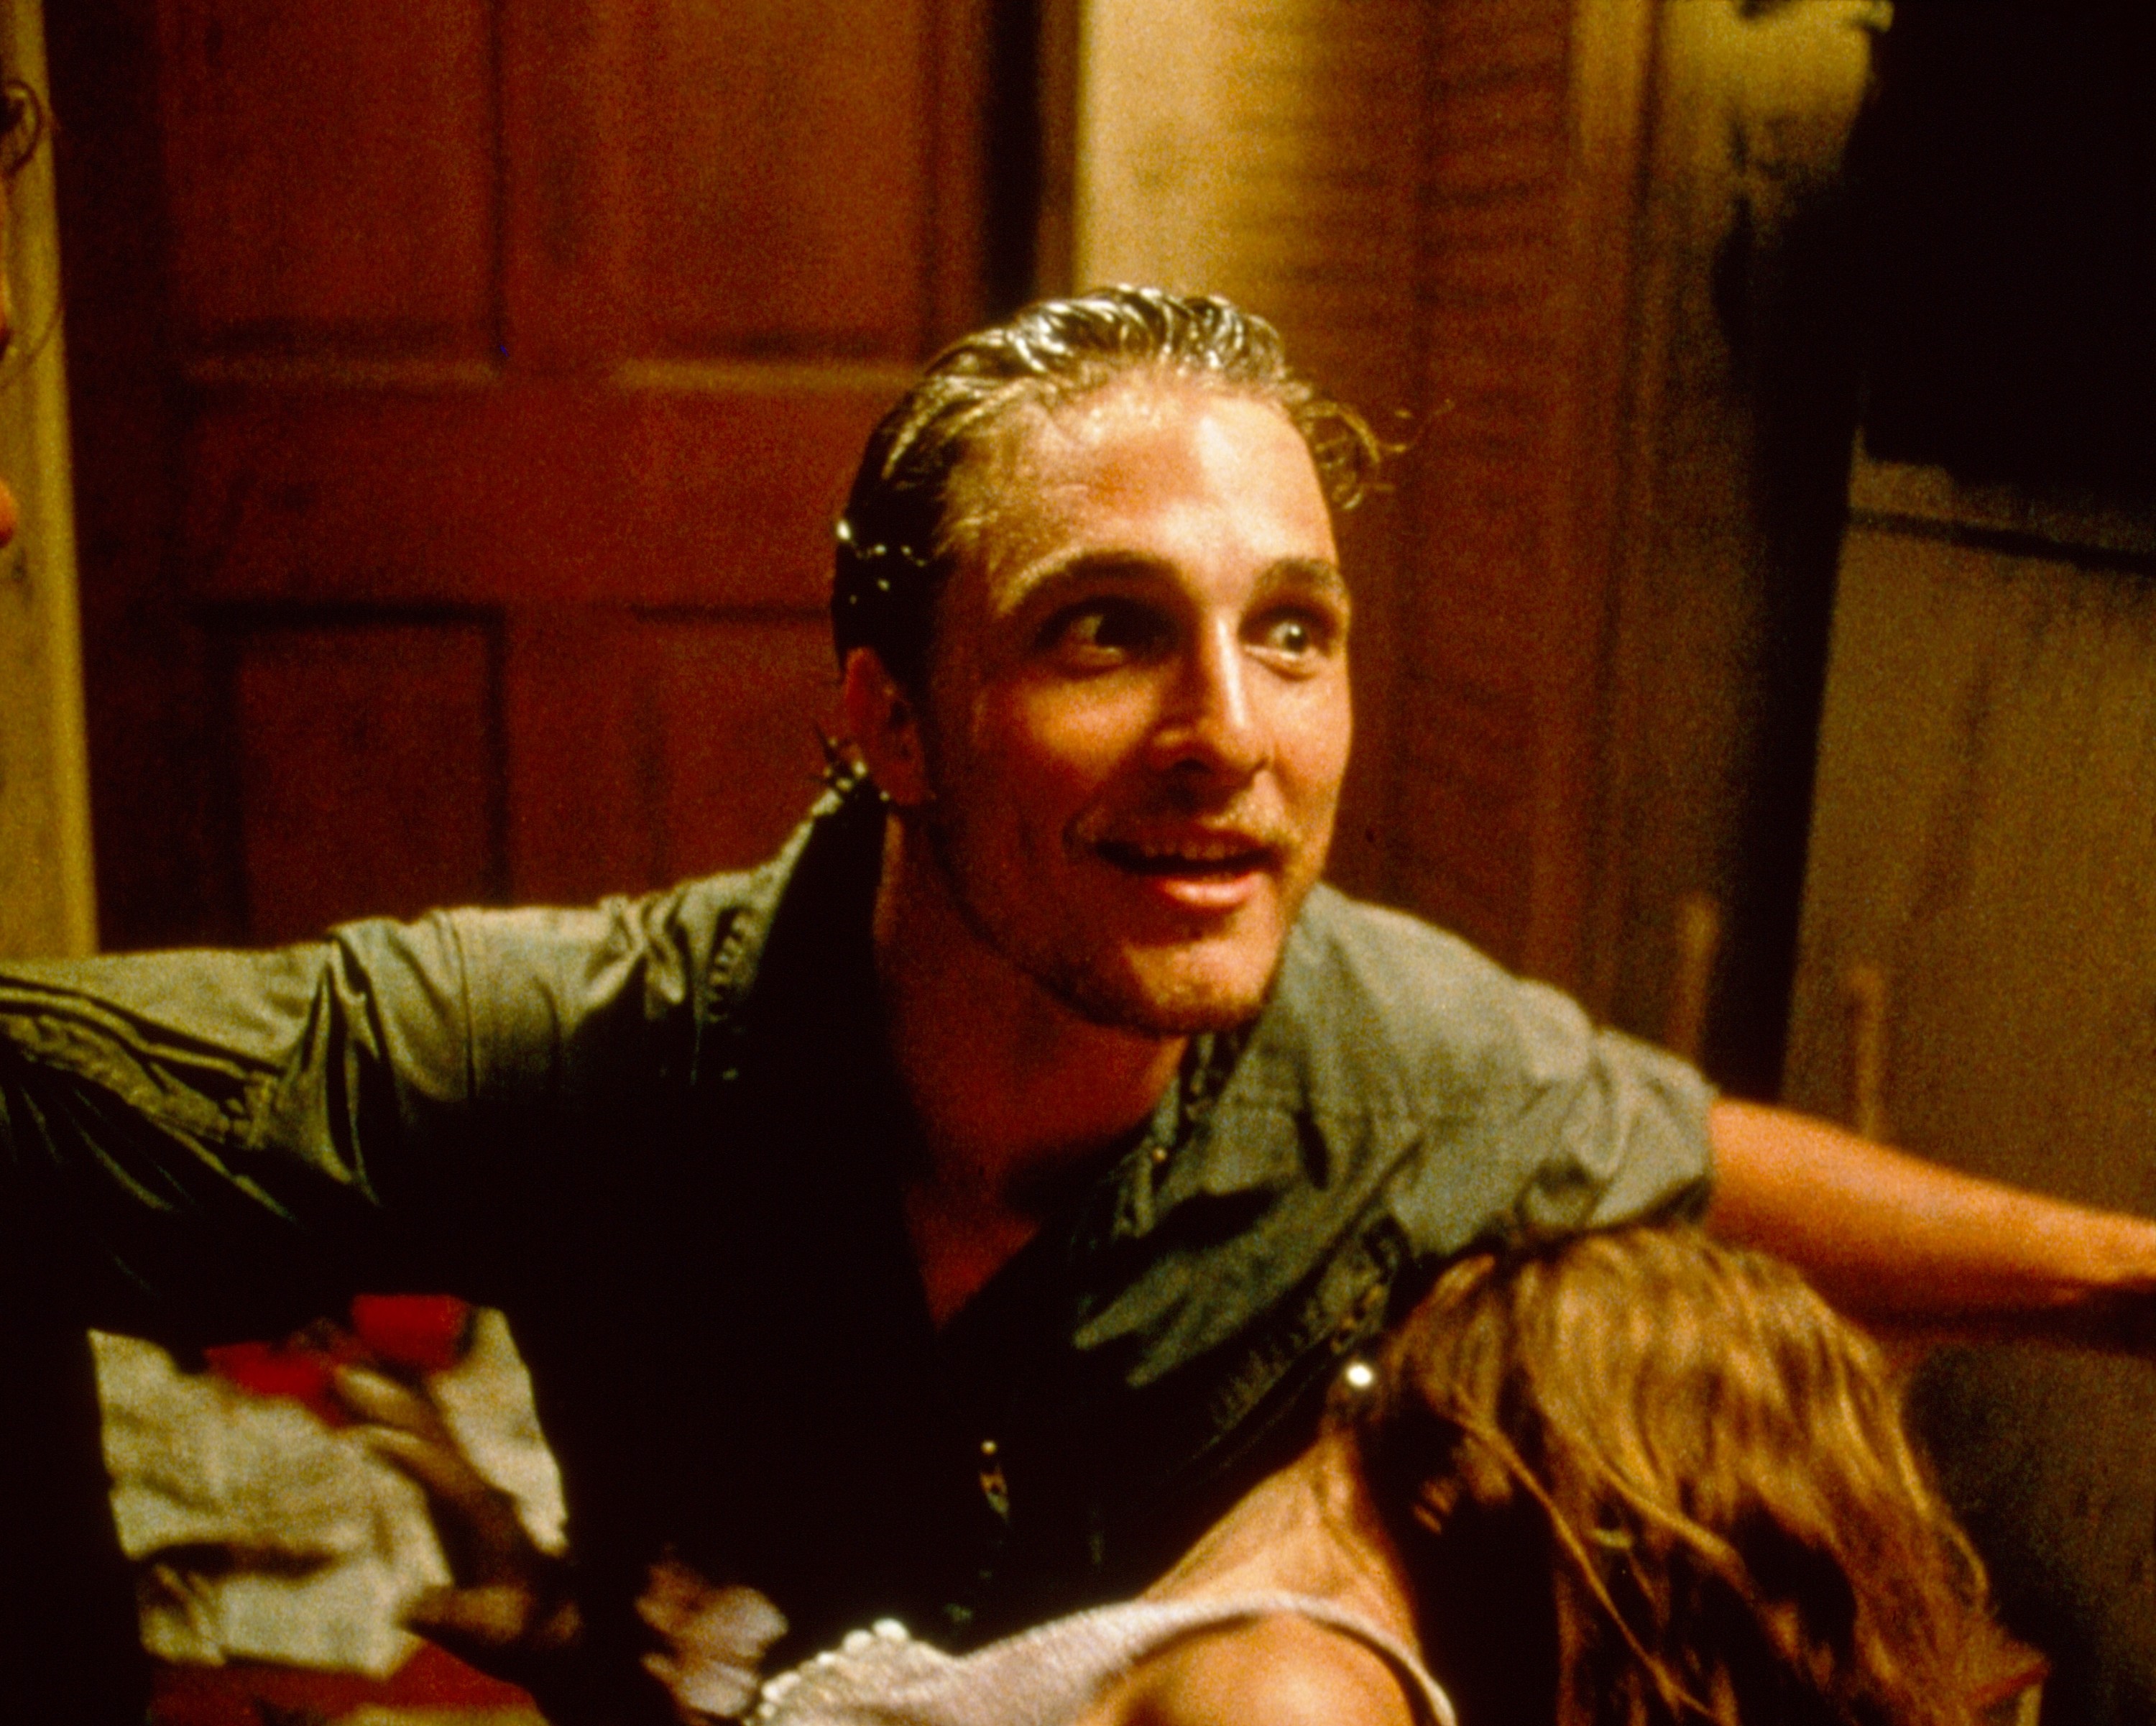 Matthew Mcconaughey absolutely wigging out in TEXAS CHAINSAW MASSACRE: NEXT GENERATION (aka THE RETURN OF THE TEXAS CHAINSAW MASSACRE) 